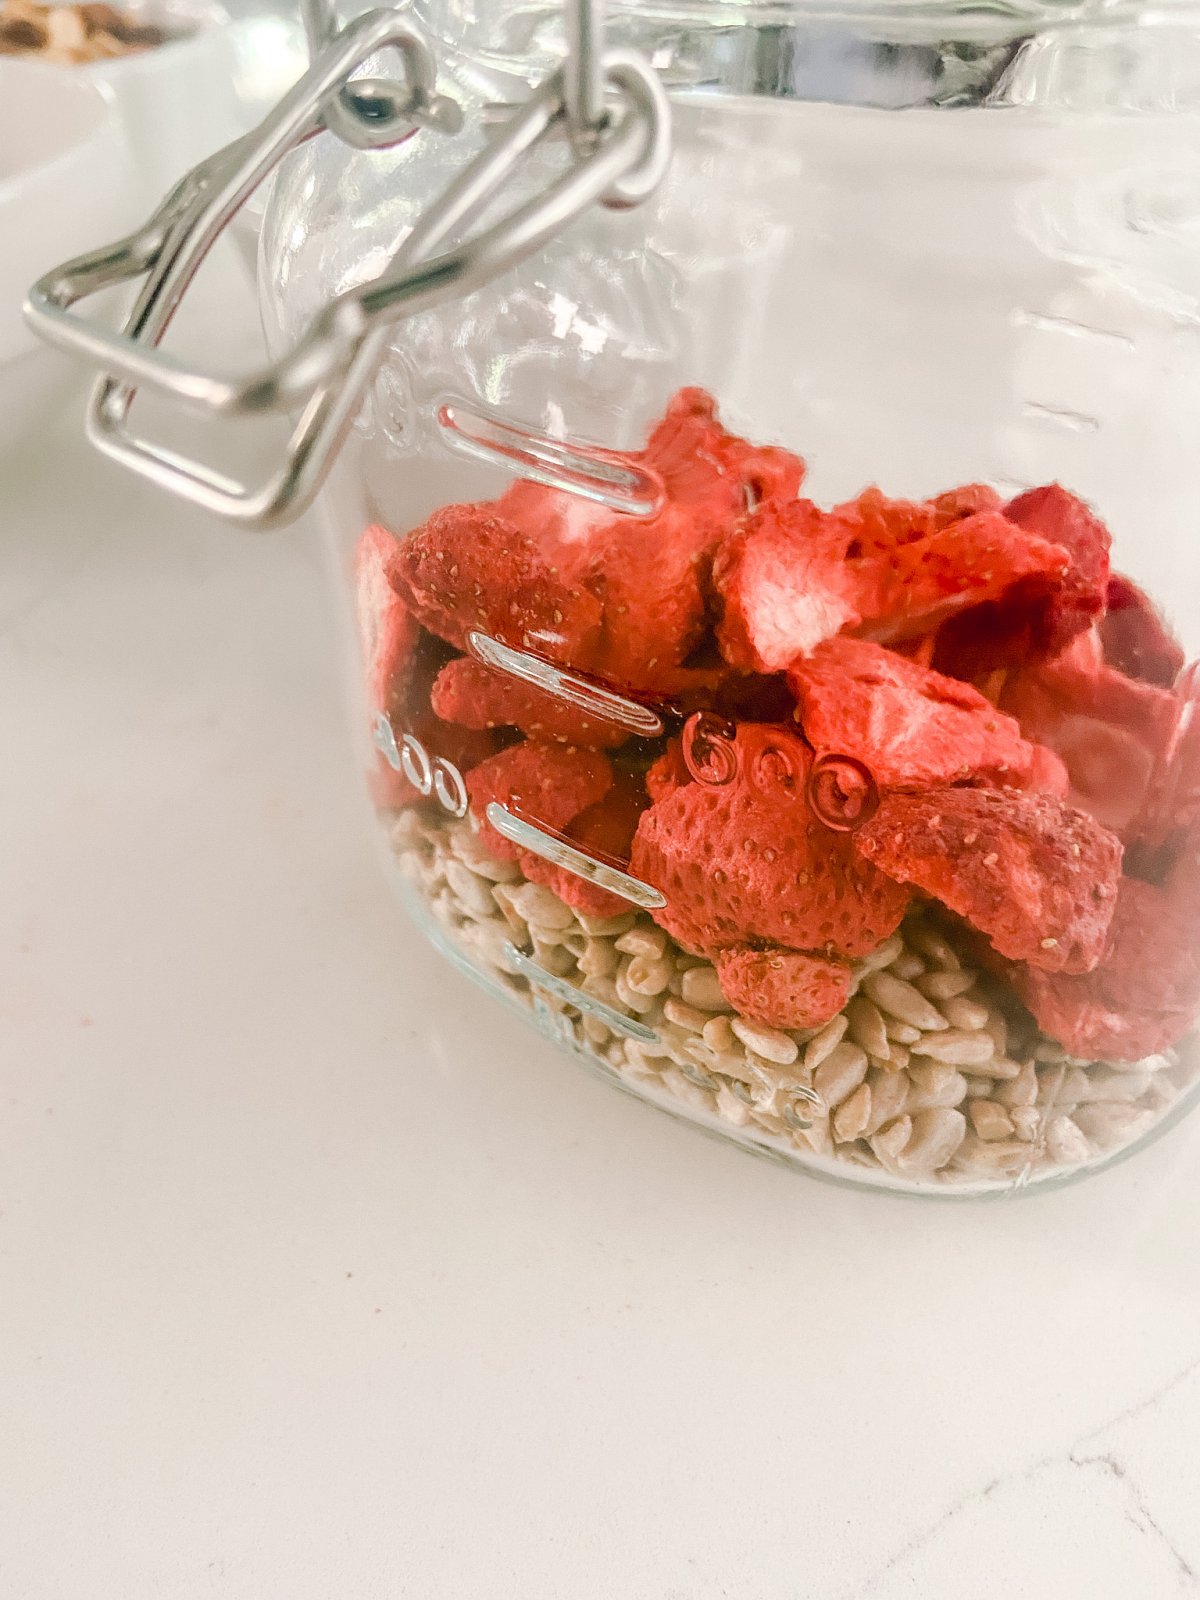 Low-Carb Keto Strawberry Chocolate Trail Mix with 5 grams net carbs per 1/3 cup serving. 